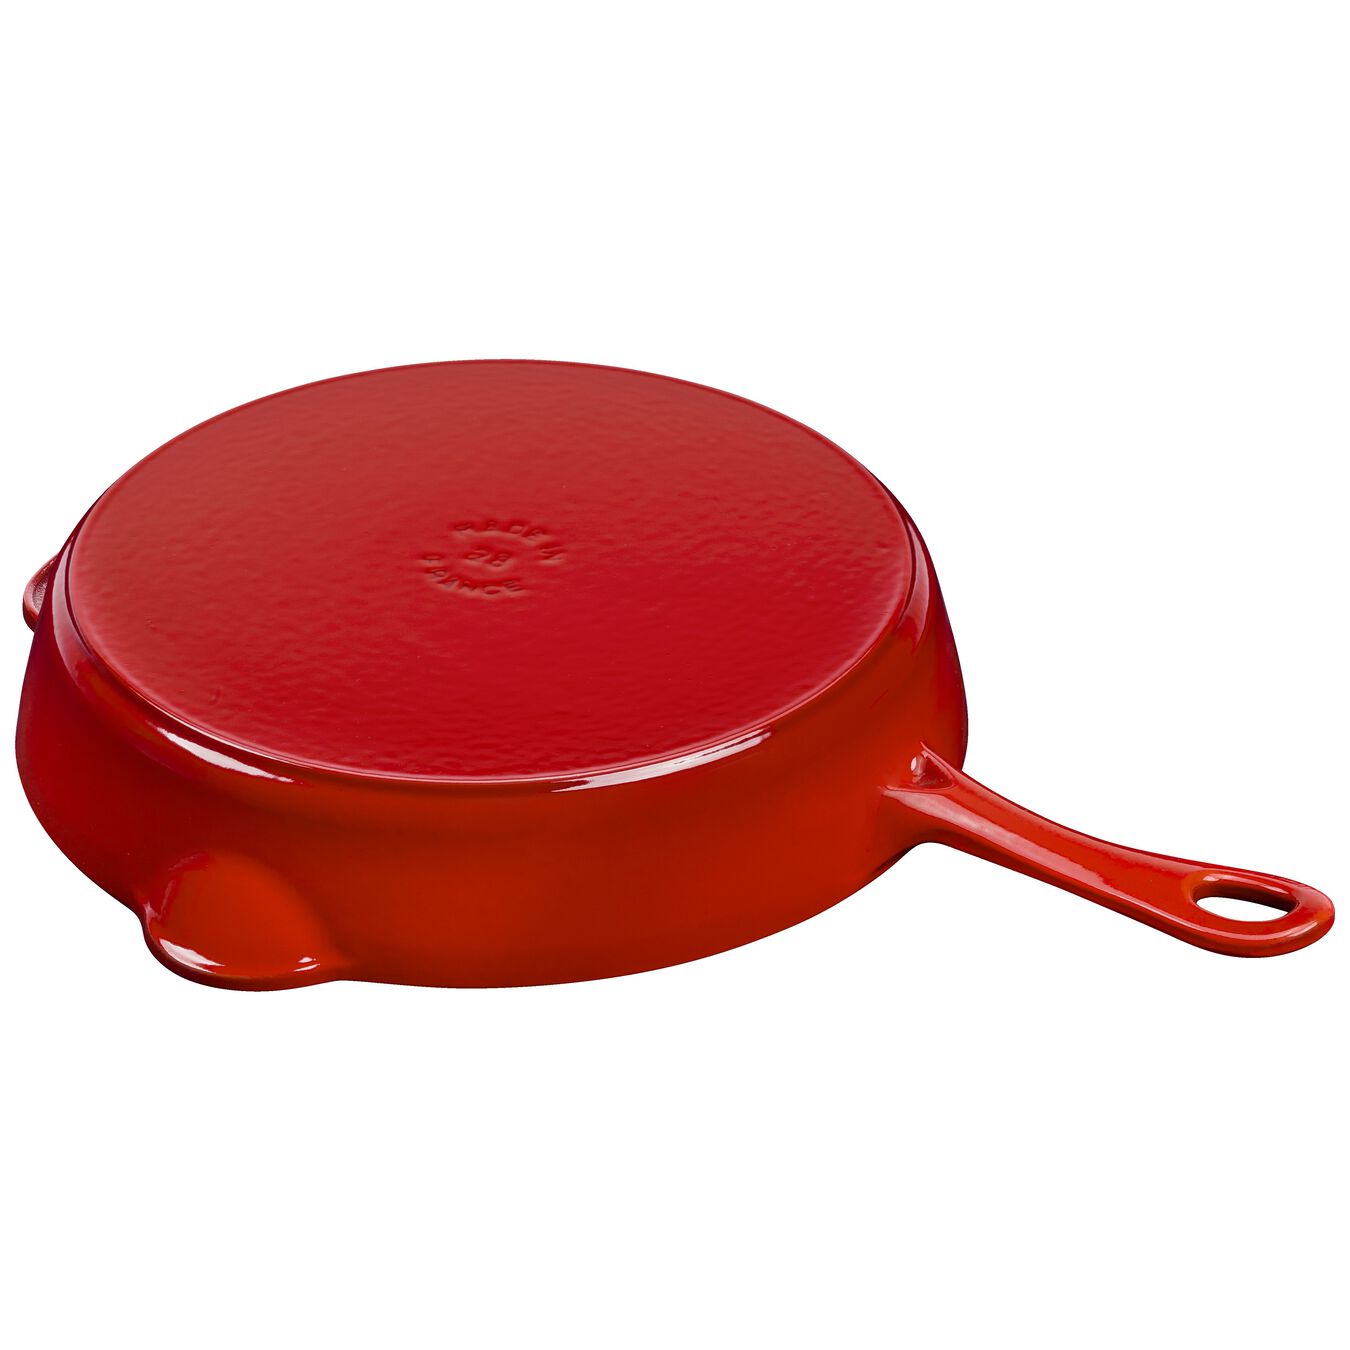 28 cm / 11 inch cast iron Traditional Deep Frypan, cherry,,large 5